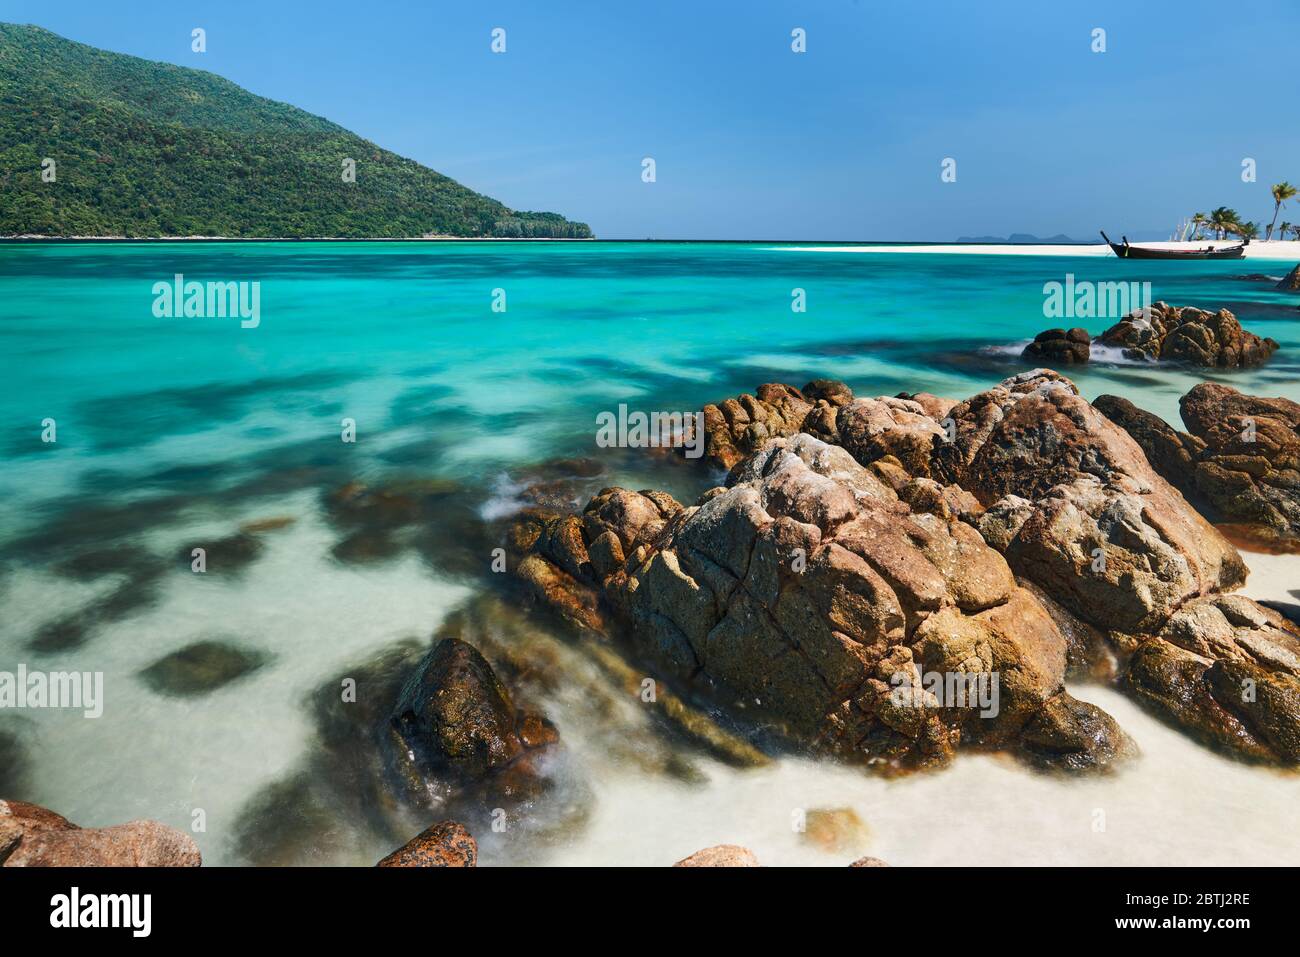 Amazing turquoise sea on tropical island. Landscape, vacation, summer travel concept Stock Photo